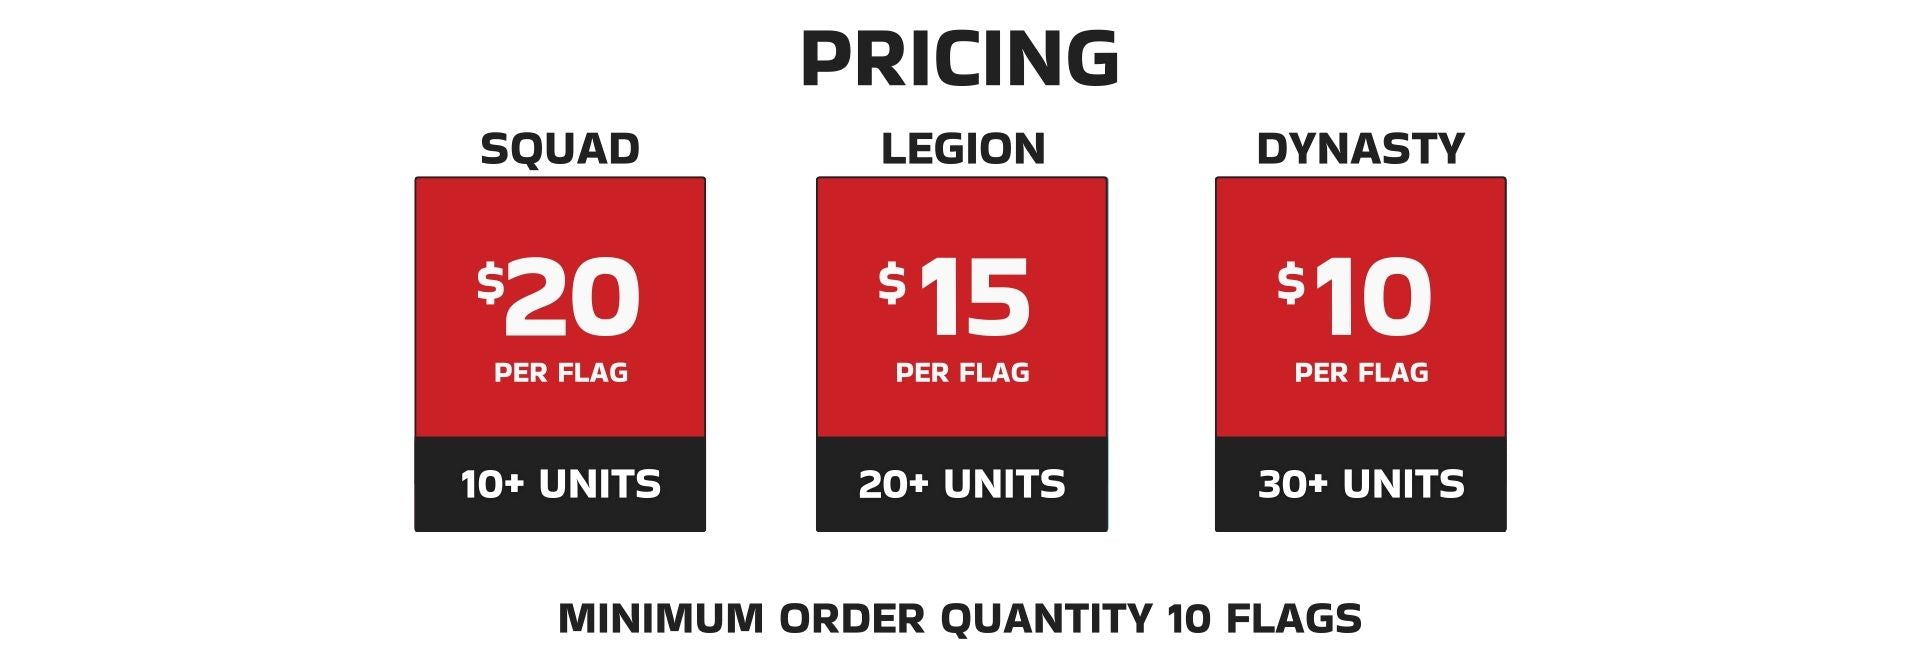 Graphic showing Flagaholics' pricing tiers for bulk orders: 'SQUAD' at $20 per flag for 10+ units, 'LEGION' at $15 per flag for 20+ units, 'DYNASTY' at $10 per flag for 30+ units, with a minimum order quantity of 10 flags